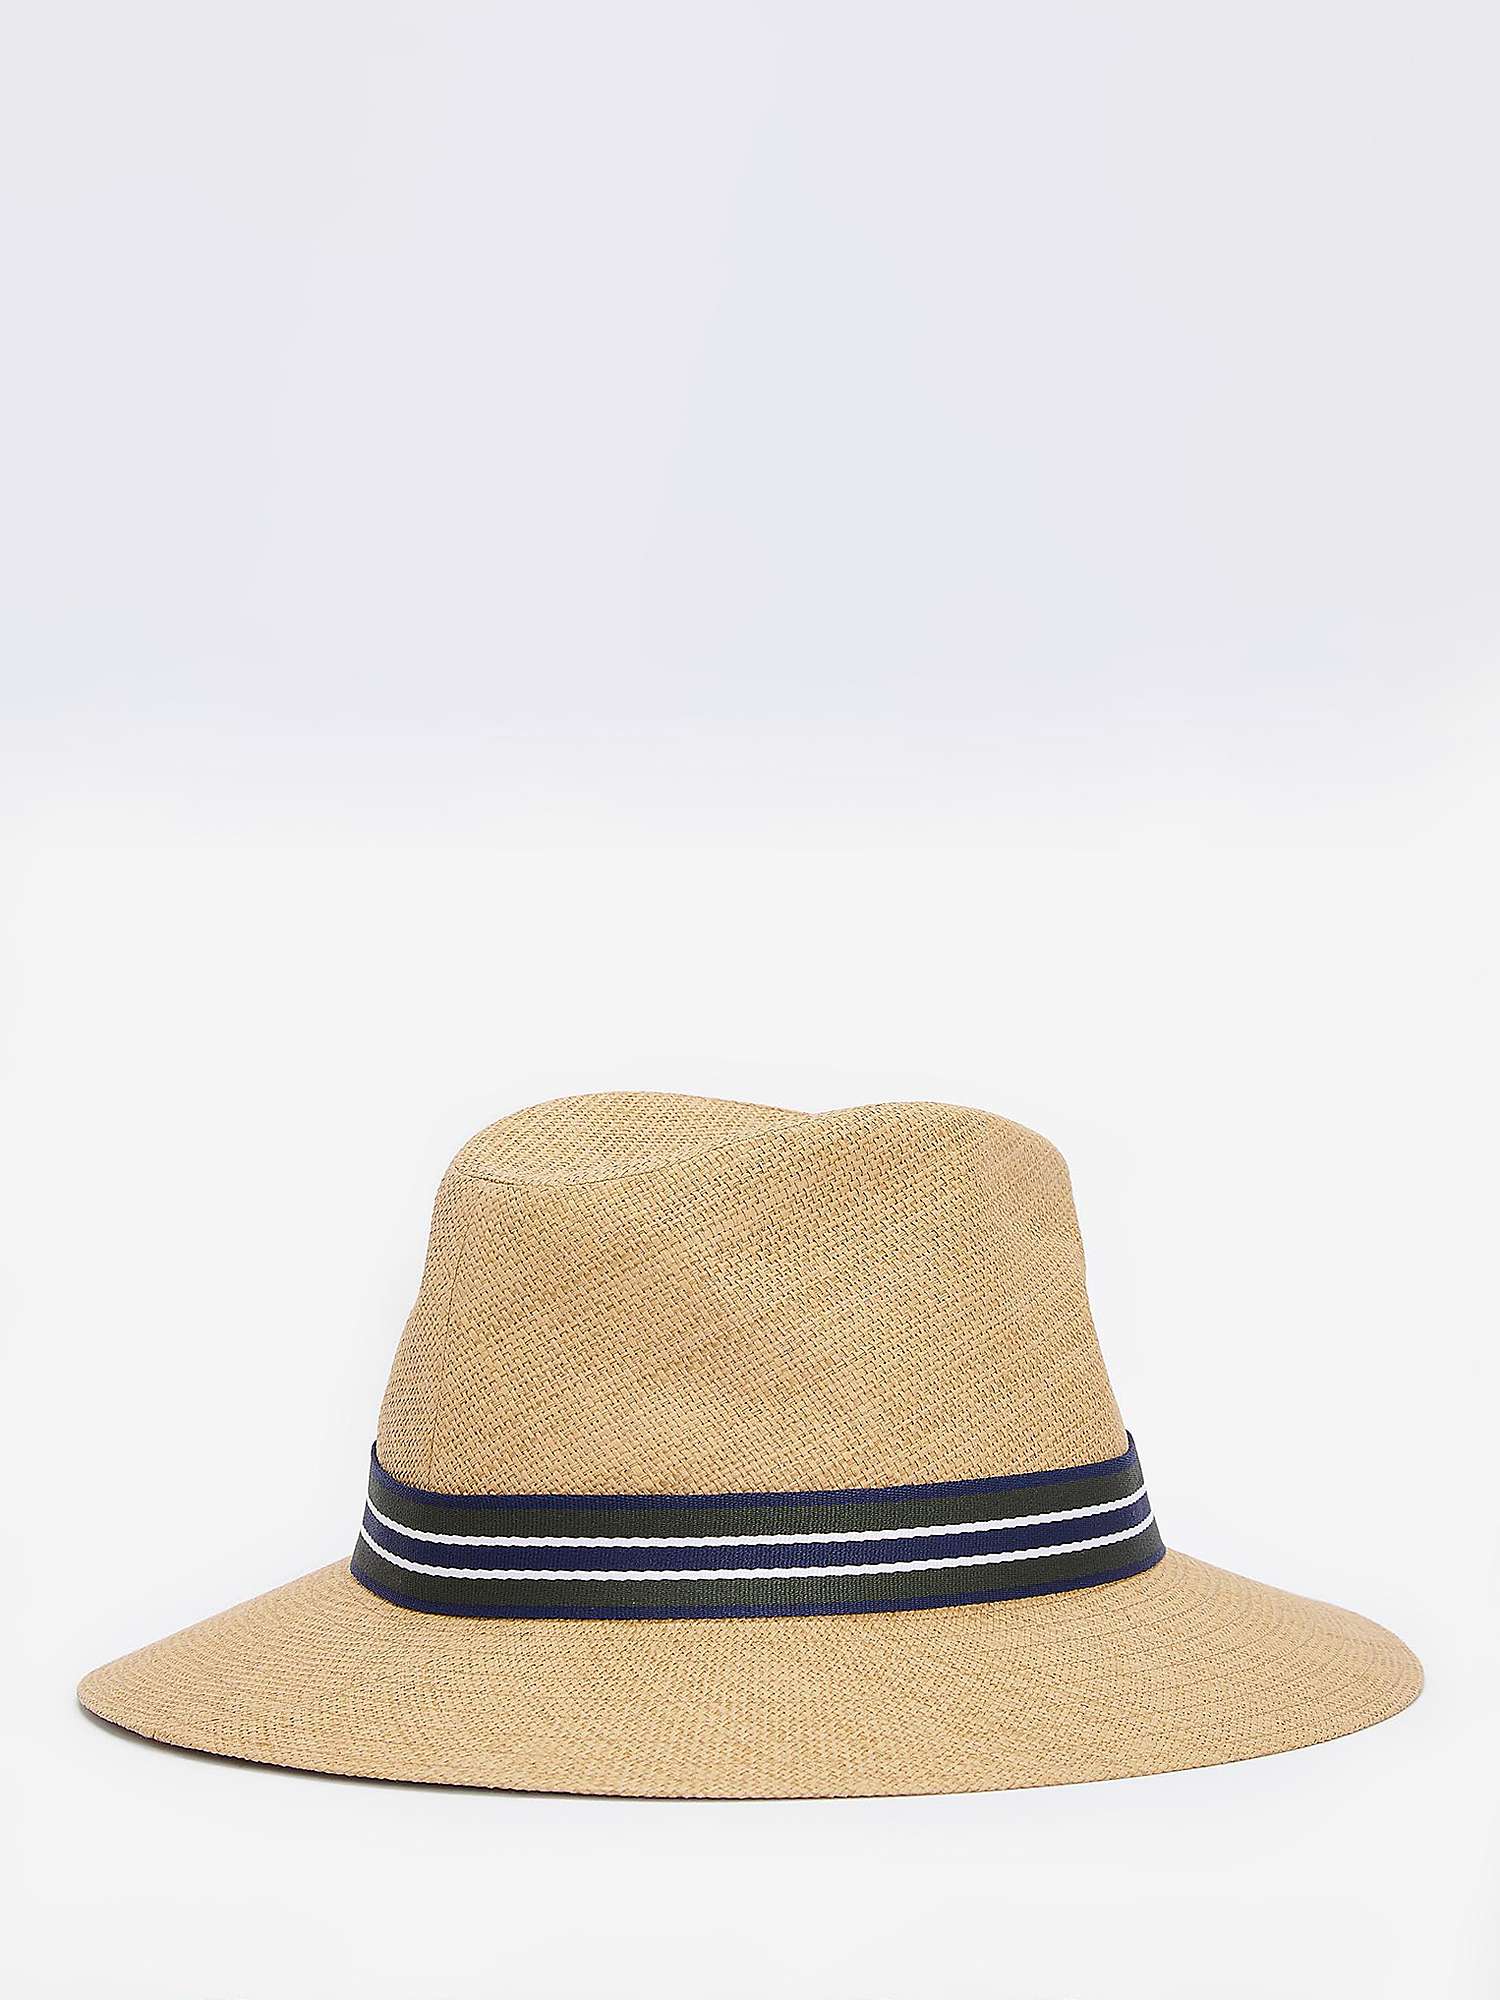 Buy Barbour Rothbury Summer Hat, Tan/Classic Online at johnlewis.com